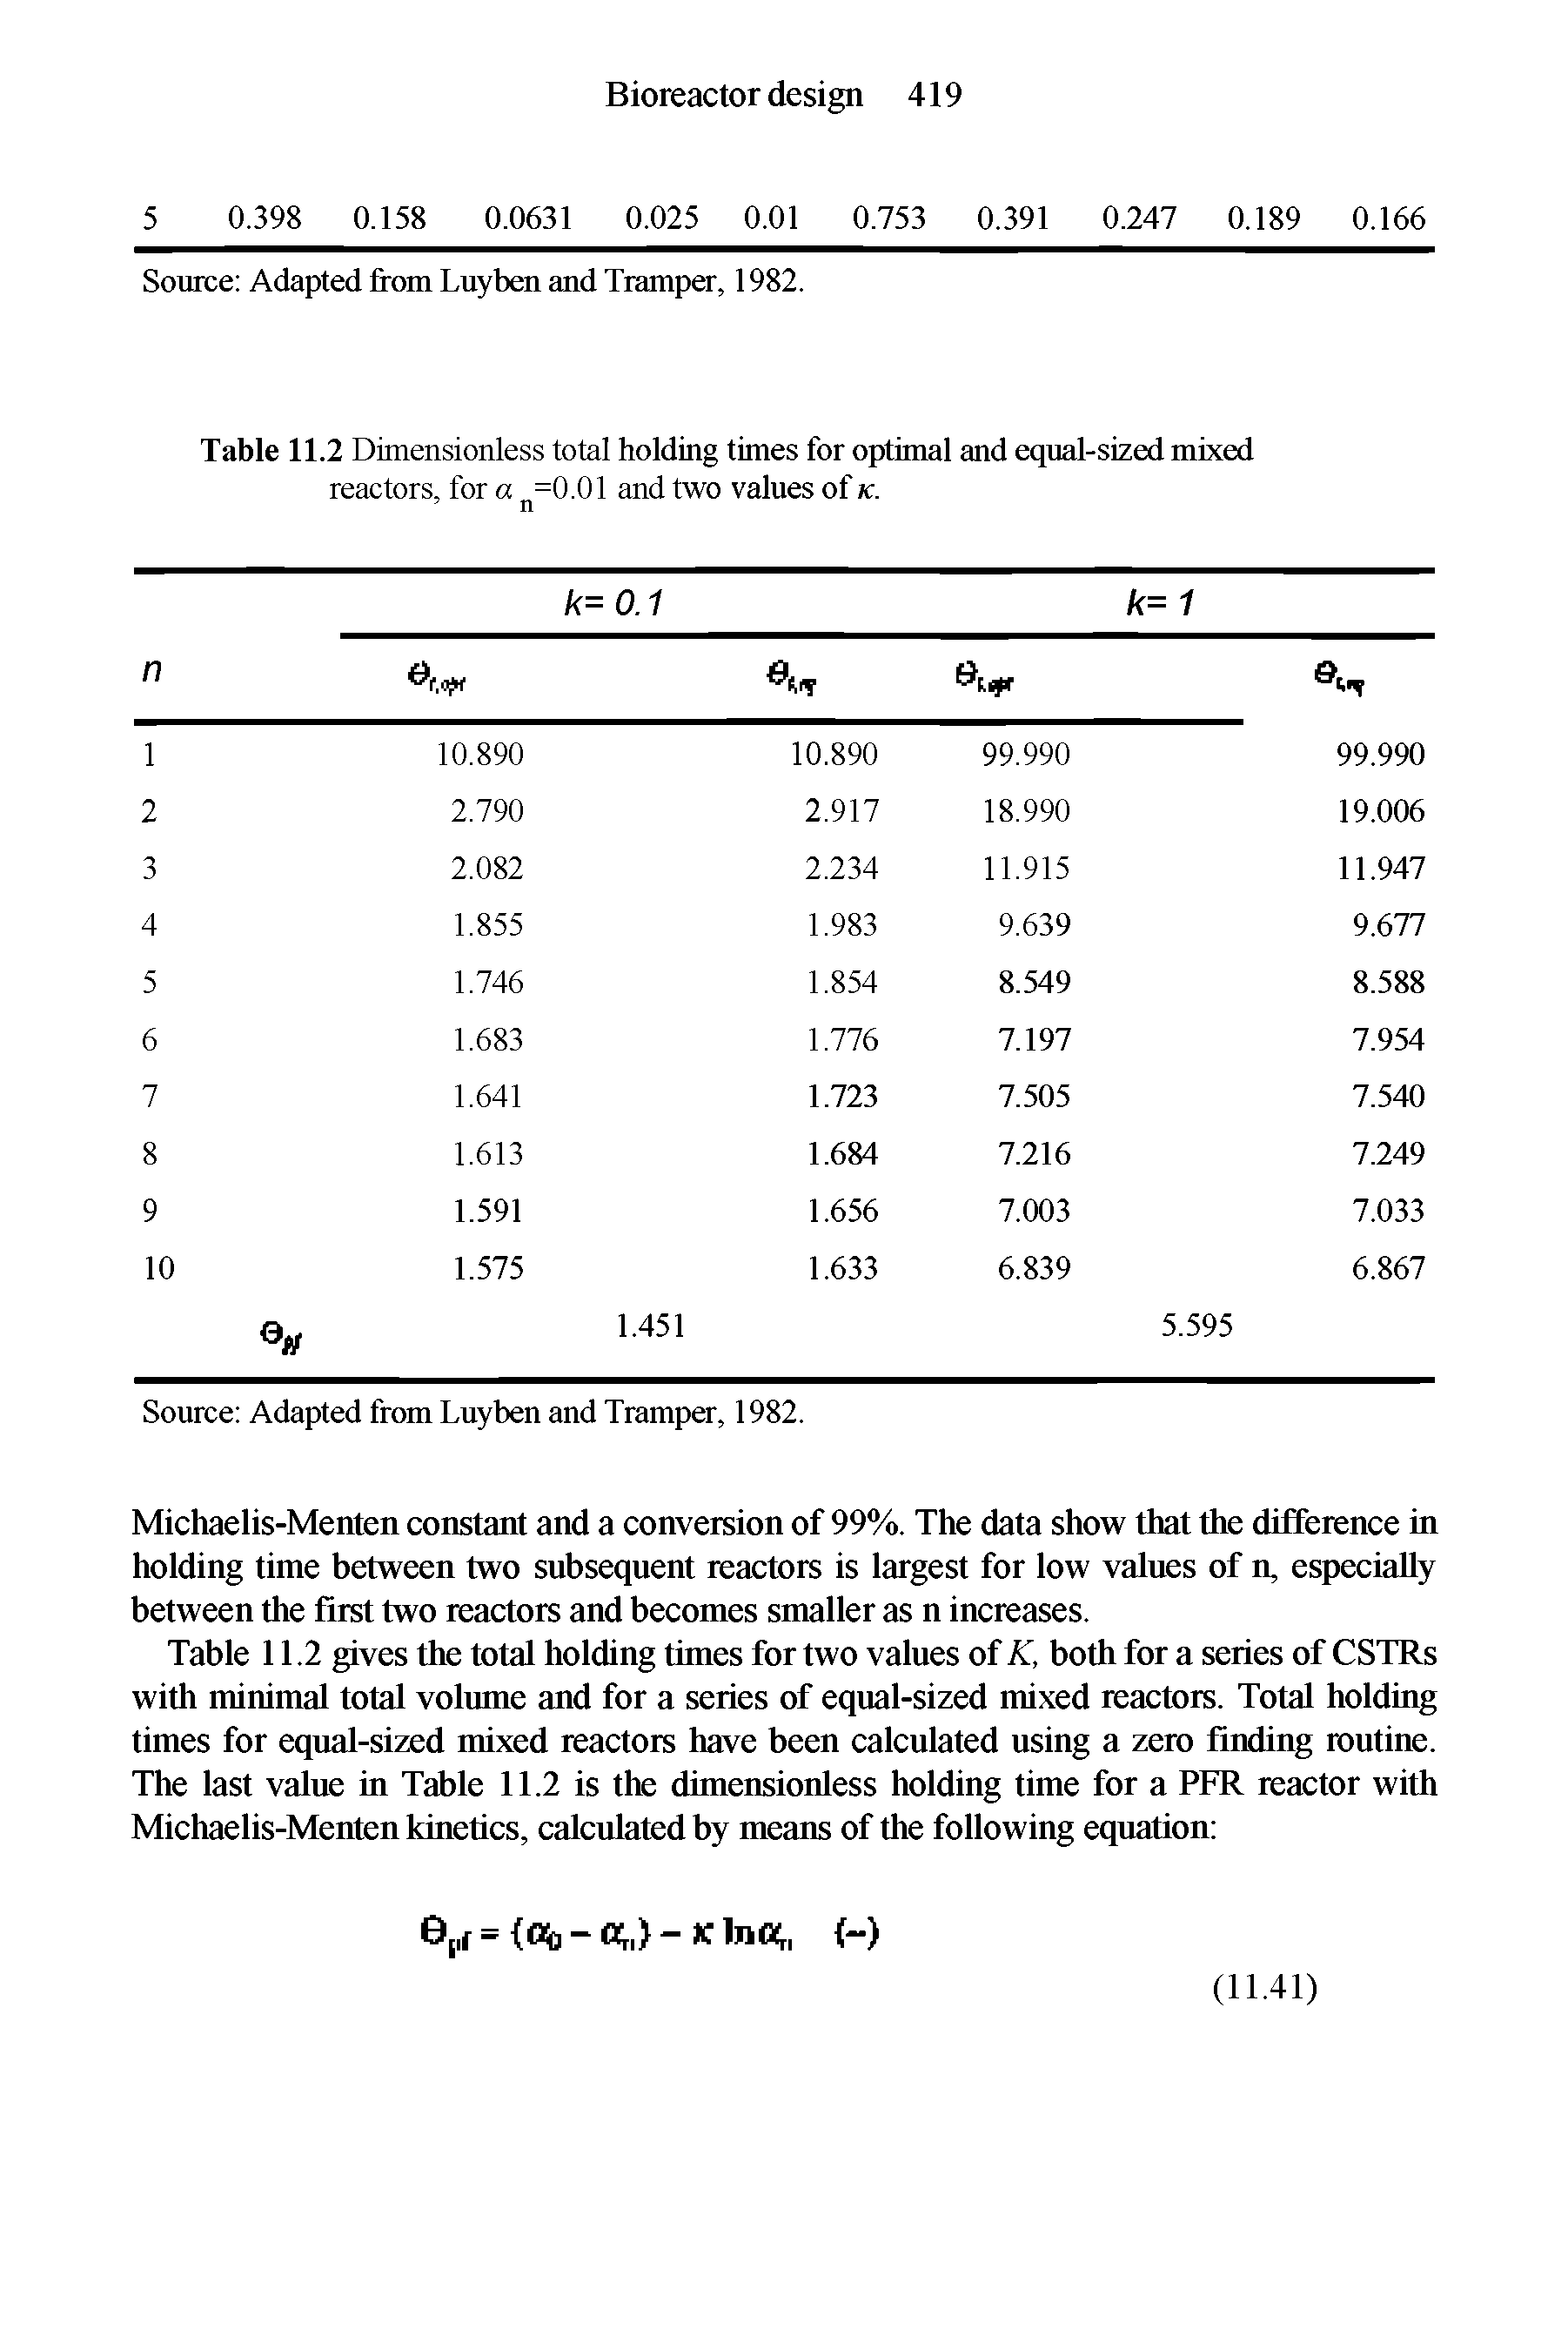 Table 11.2 Dimensionless total holding times for optimal and equal-sized mixed reactors, for a =0.01 and two values of k.